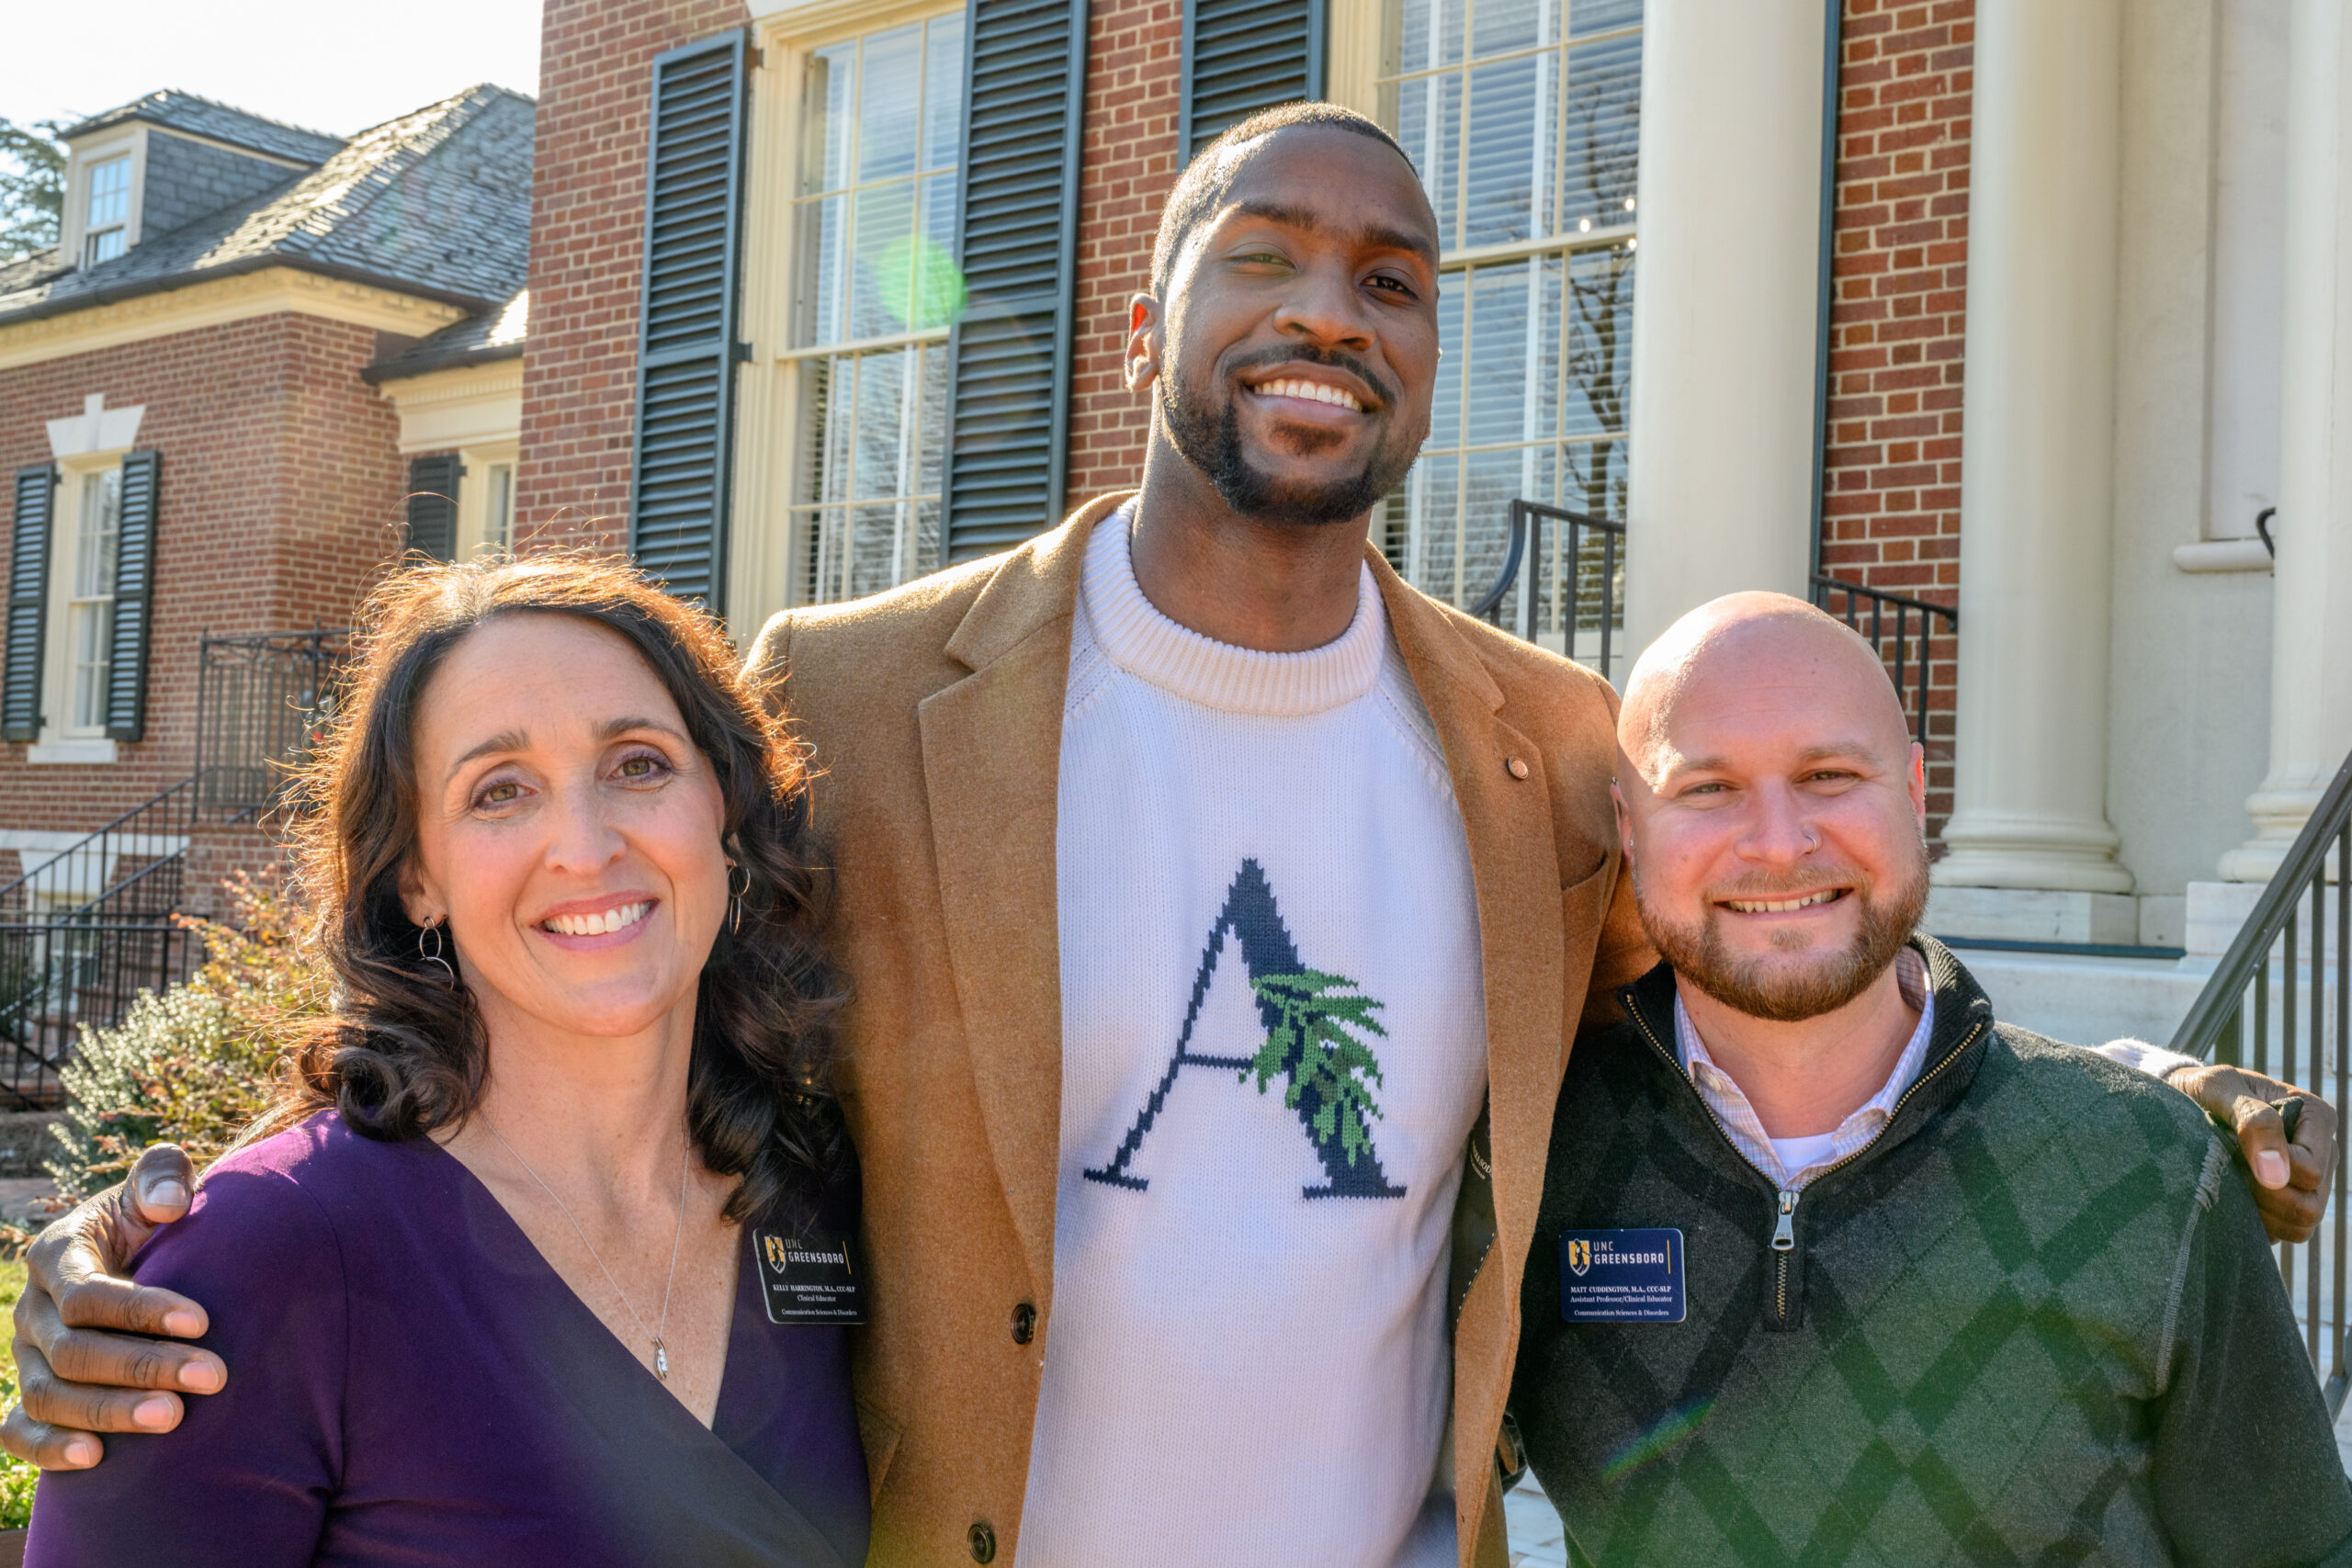 NBA player Michael Kidd-Gilchrist with Communication Sciences and Disorders faculty members.